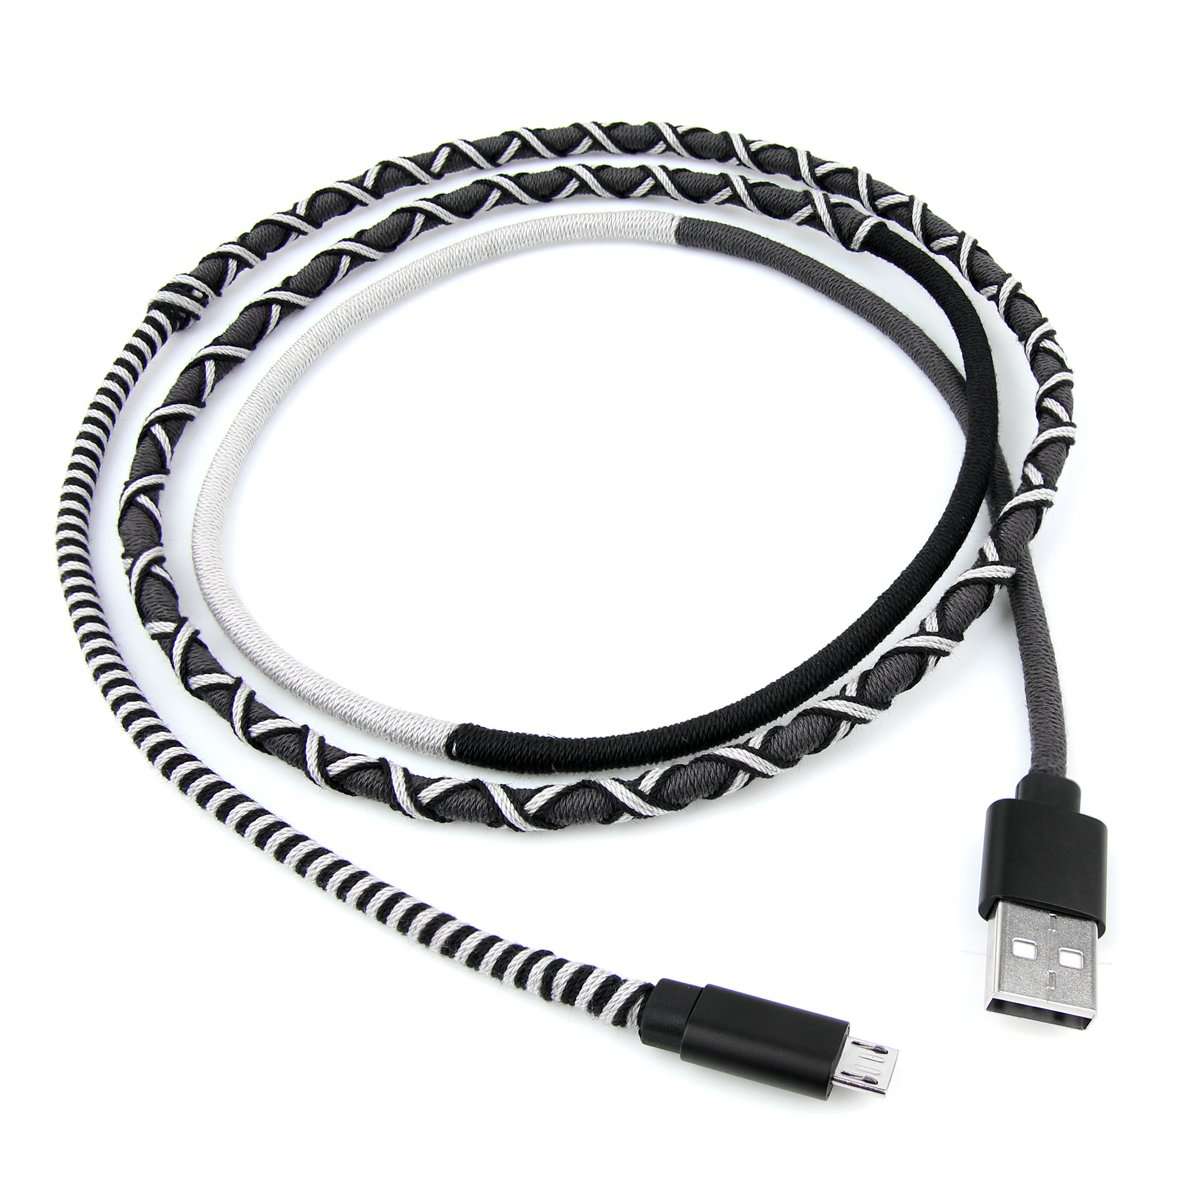 Black & grey color tangle free fast charging cable by crossloop